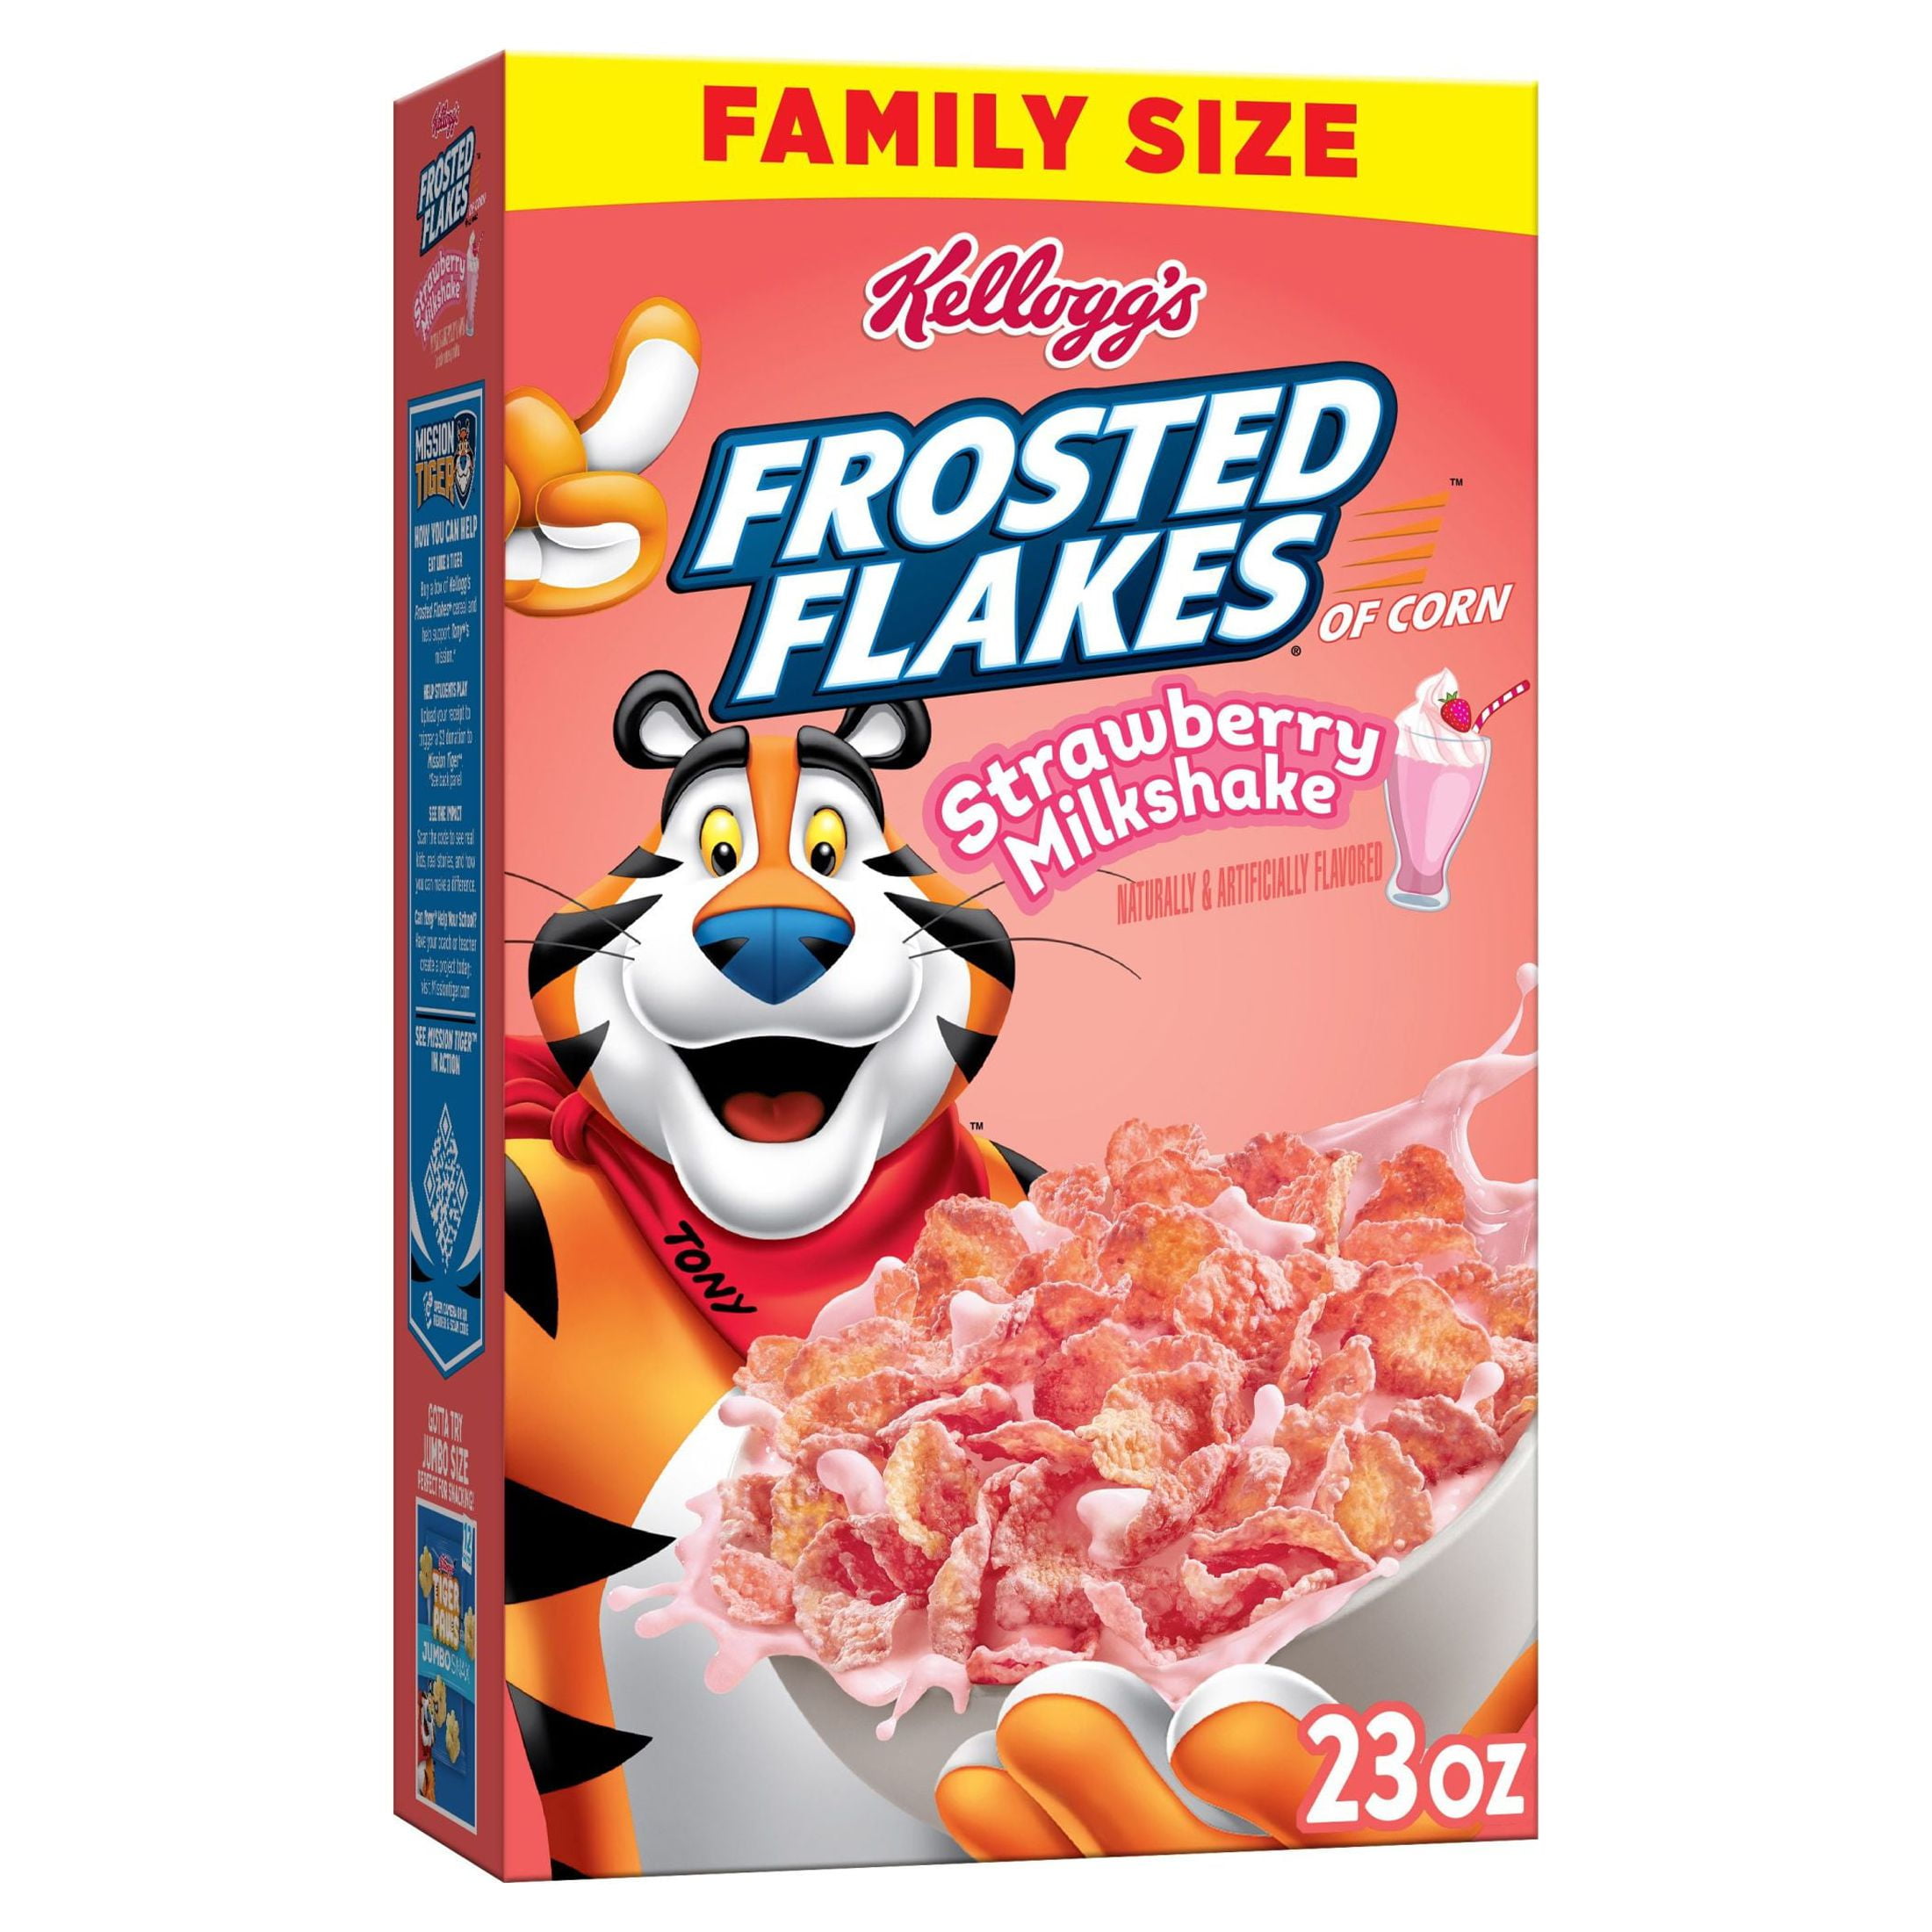 Kellogg's Frosted Flakes Strawberry Milkshake Cold Breakfast Cereal, Family  Size, 23 oz Box